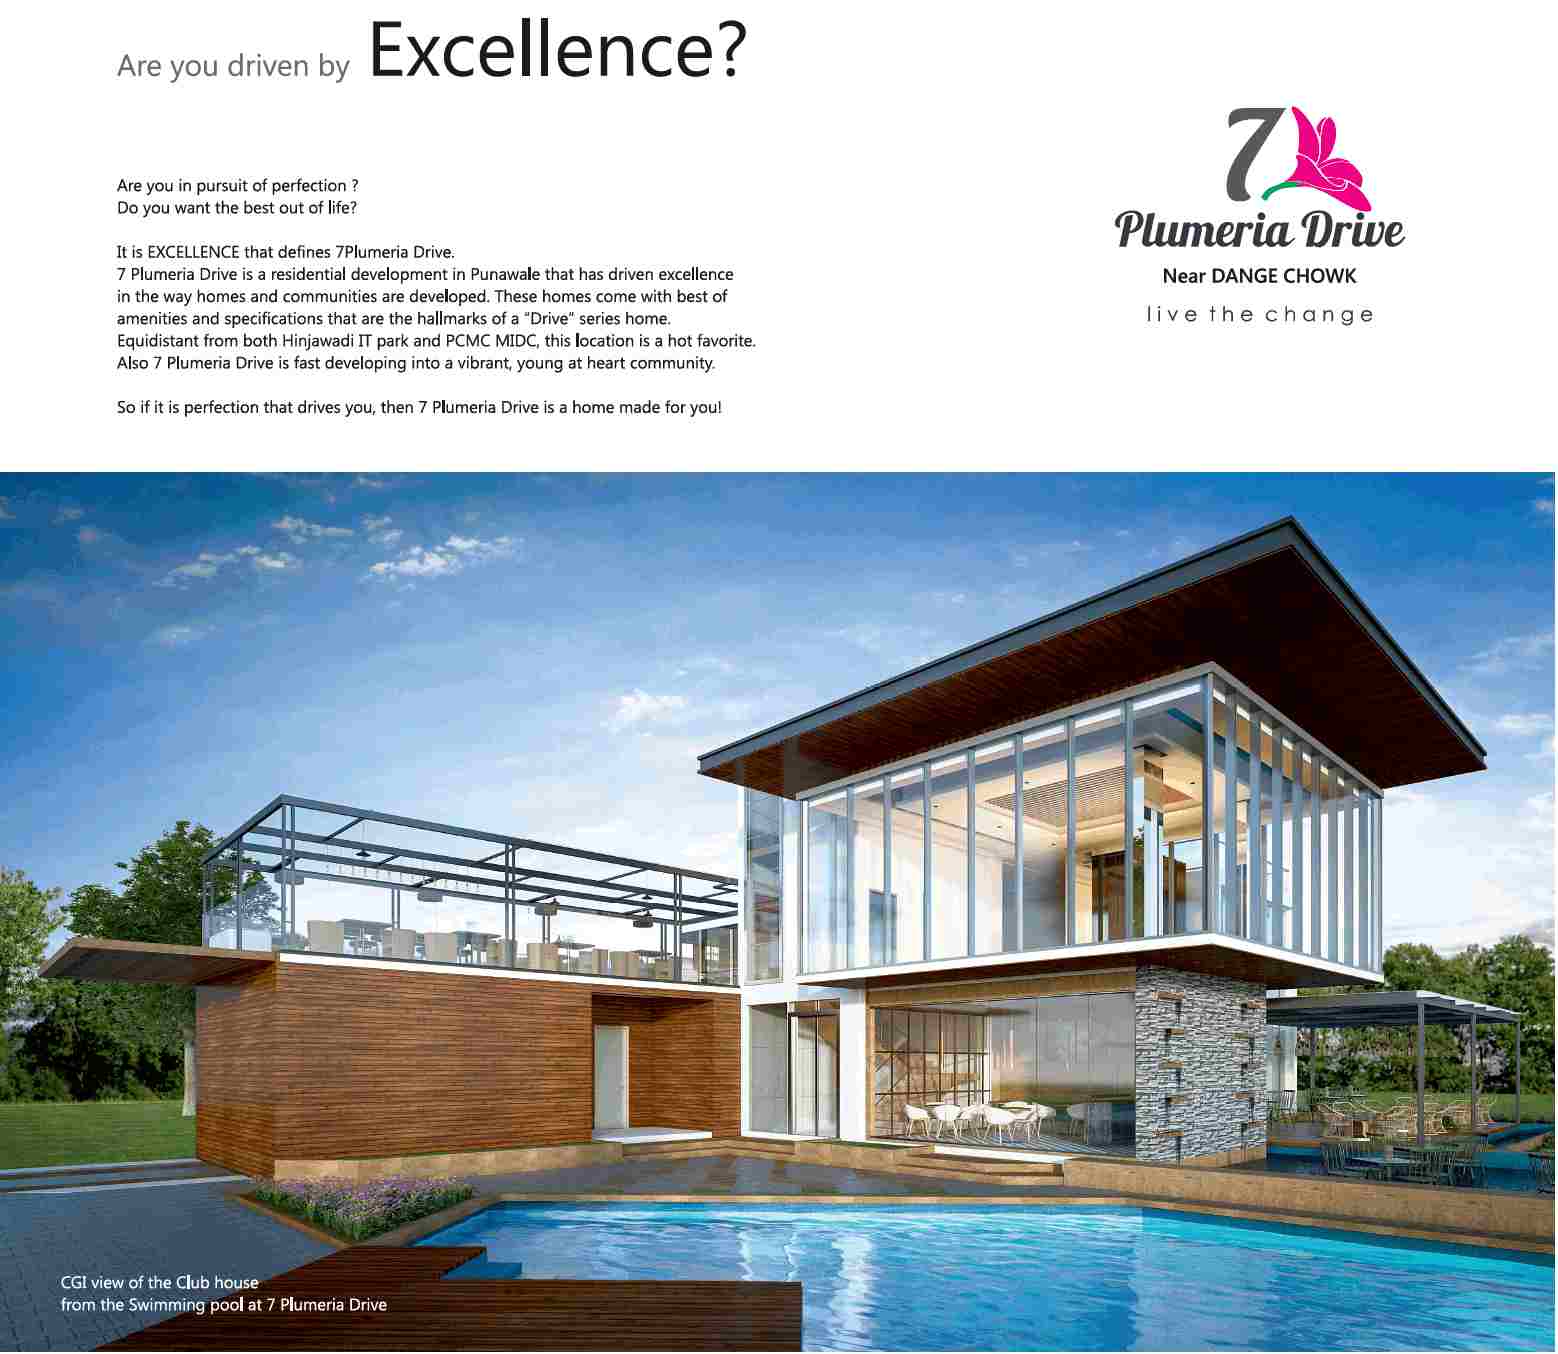 Get driven by excellence at Bhandari 7 Plumeria Drive in Pune Update